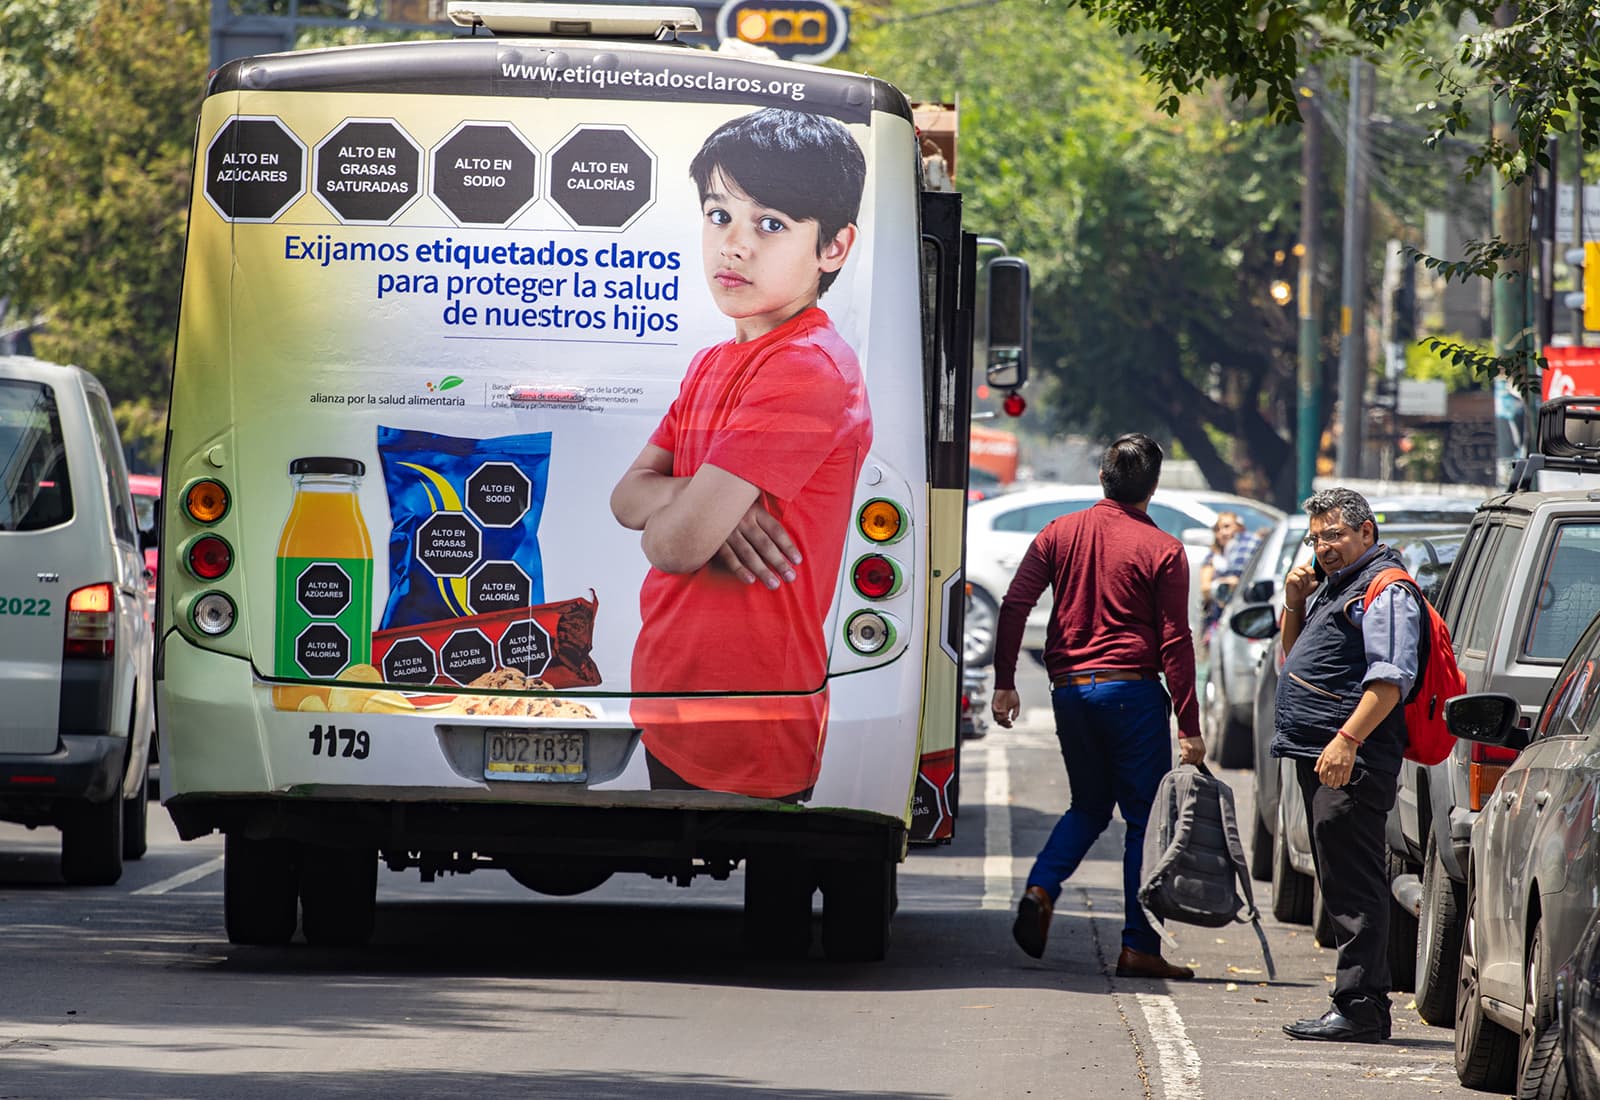 The bus displays a mass media campaign Bloomberg Philanthropies partners developed in Mexico to raise public support for front-of-package warning labels to help people make healthy choices.